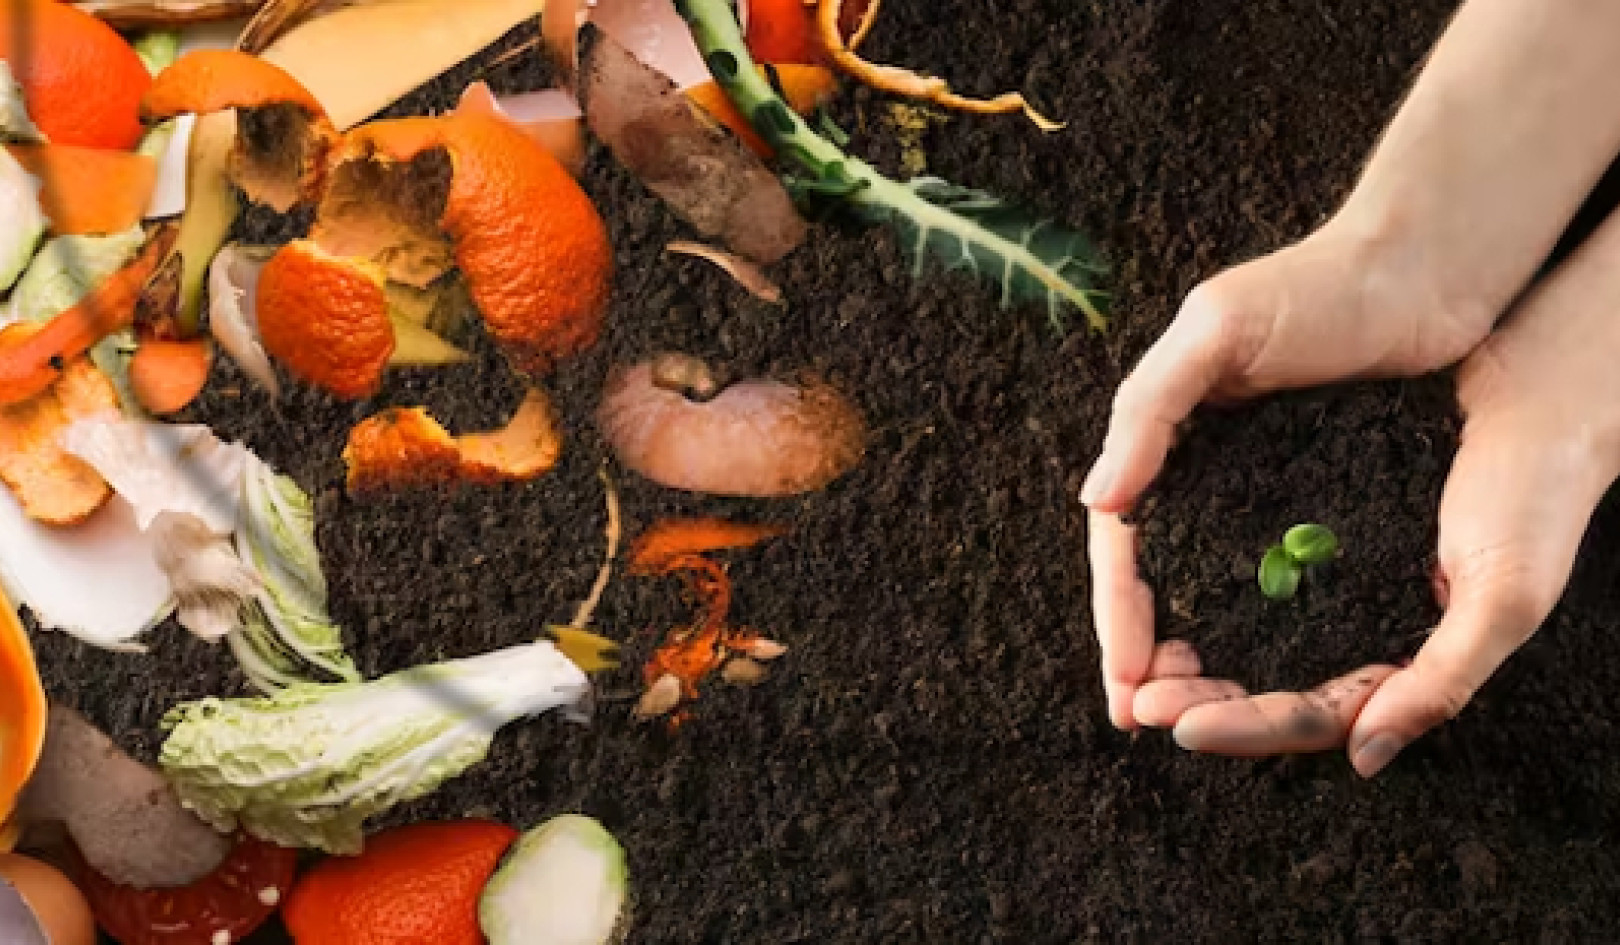 From Waste to Wealth: Why Composting Food Waste Beats Landfill